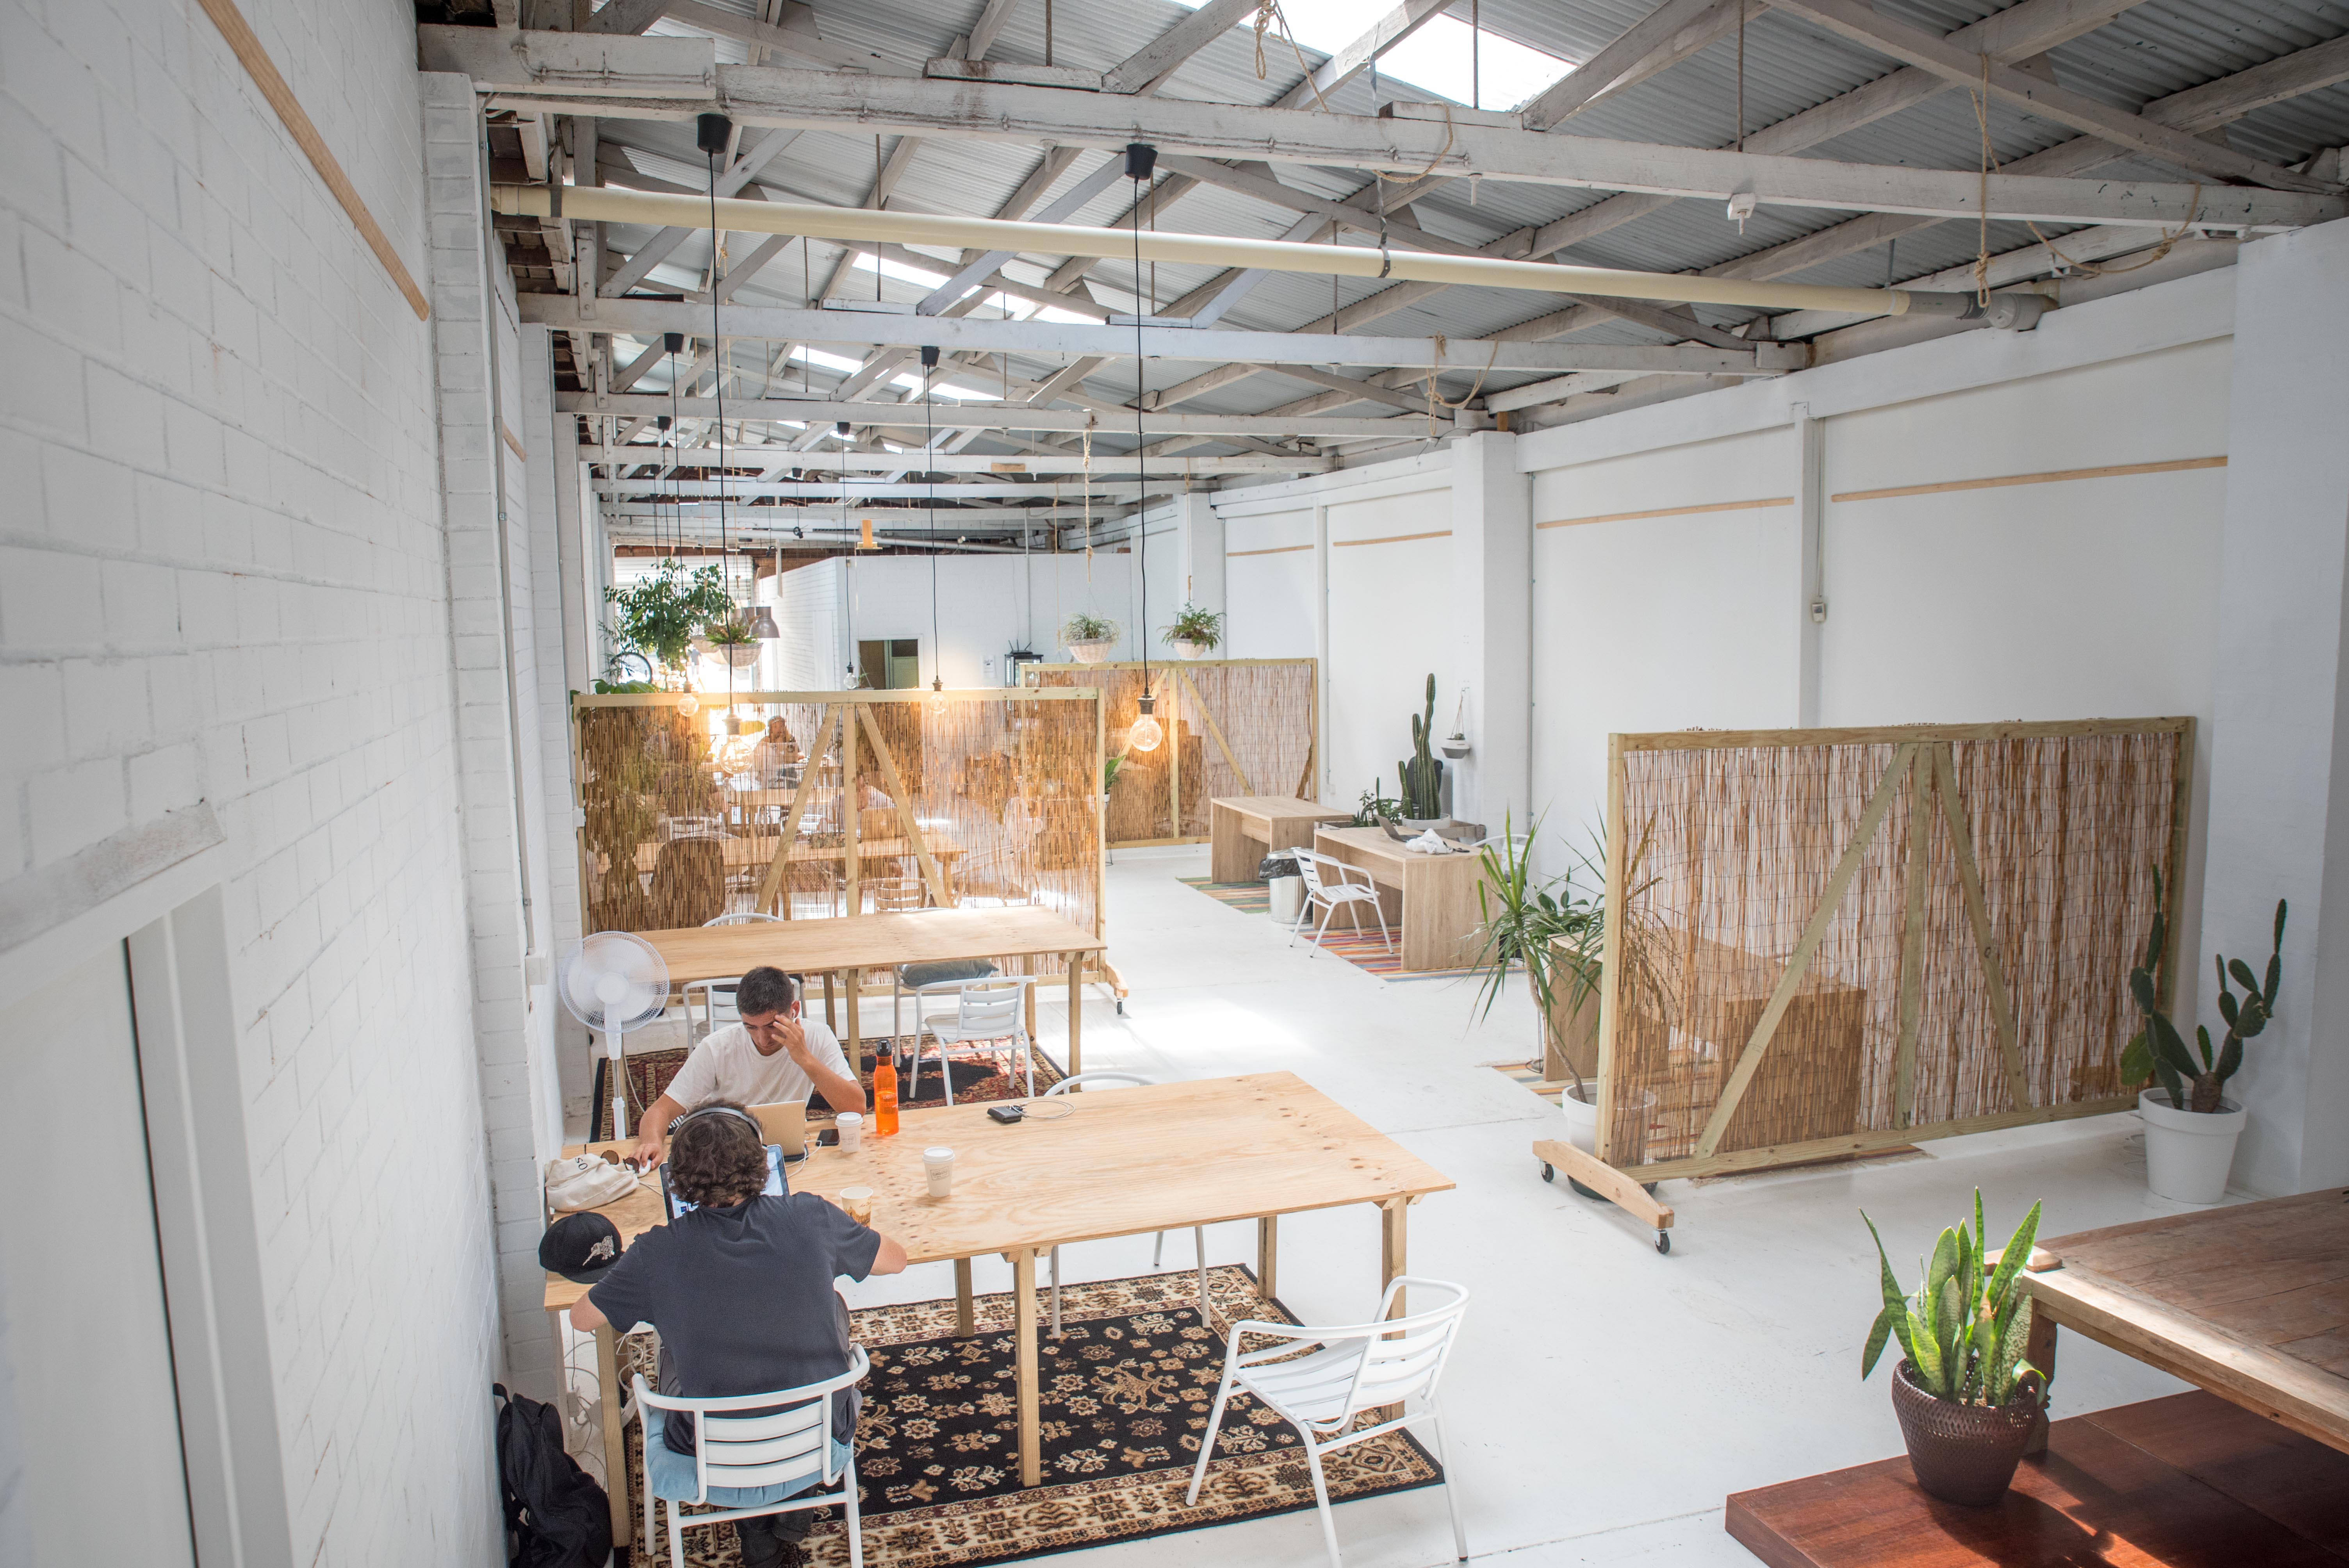 Cleaver Street and Co Studio – Co-Working Space and Coffee Shop